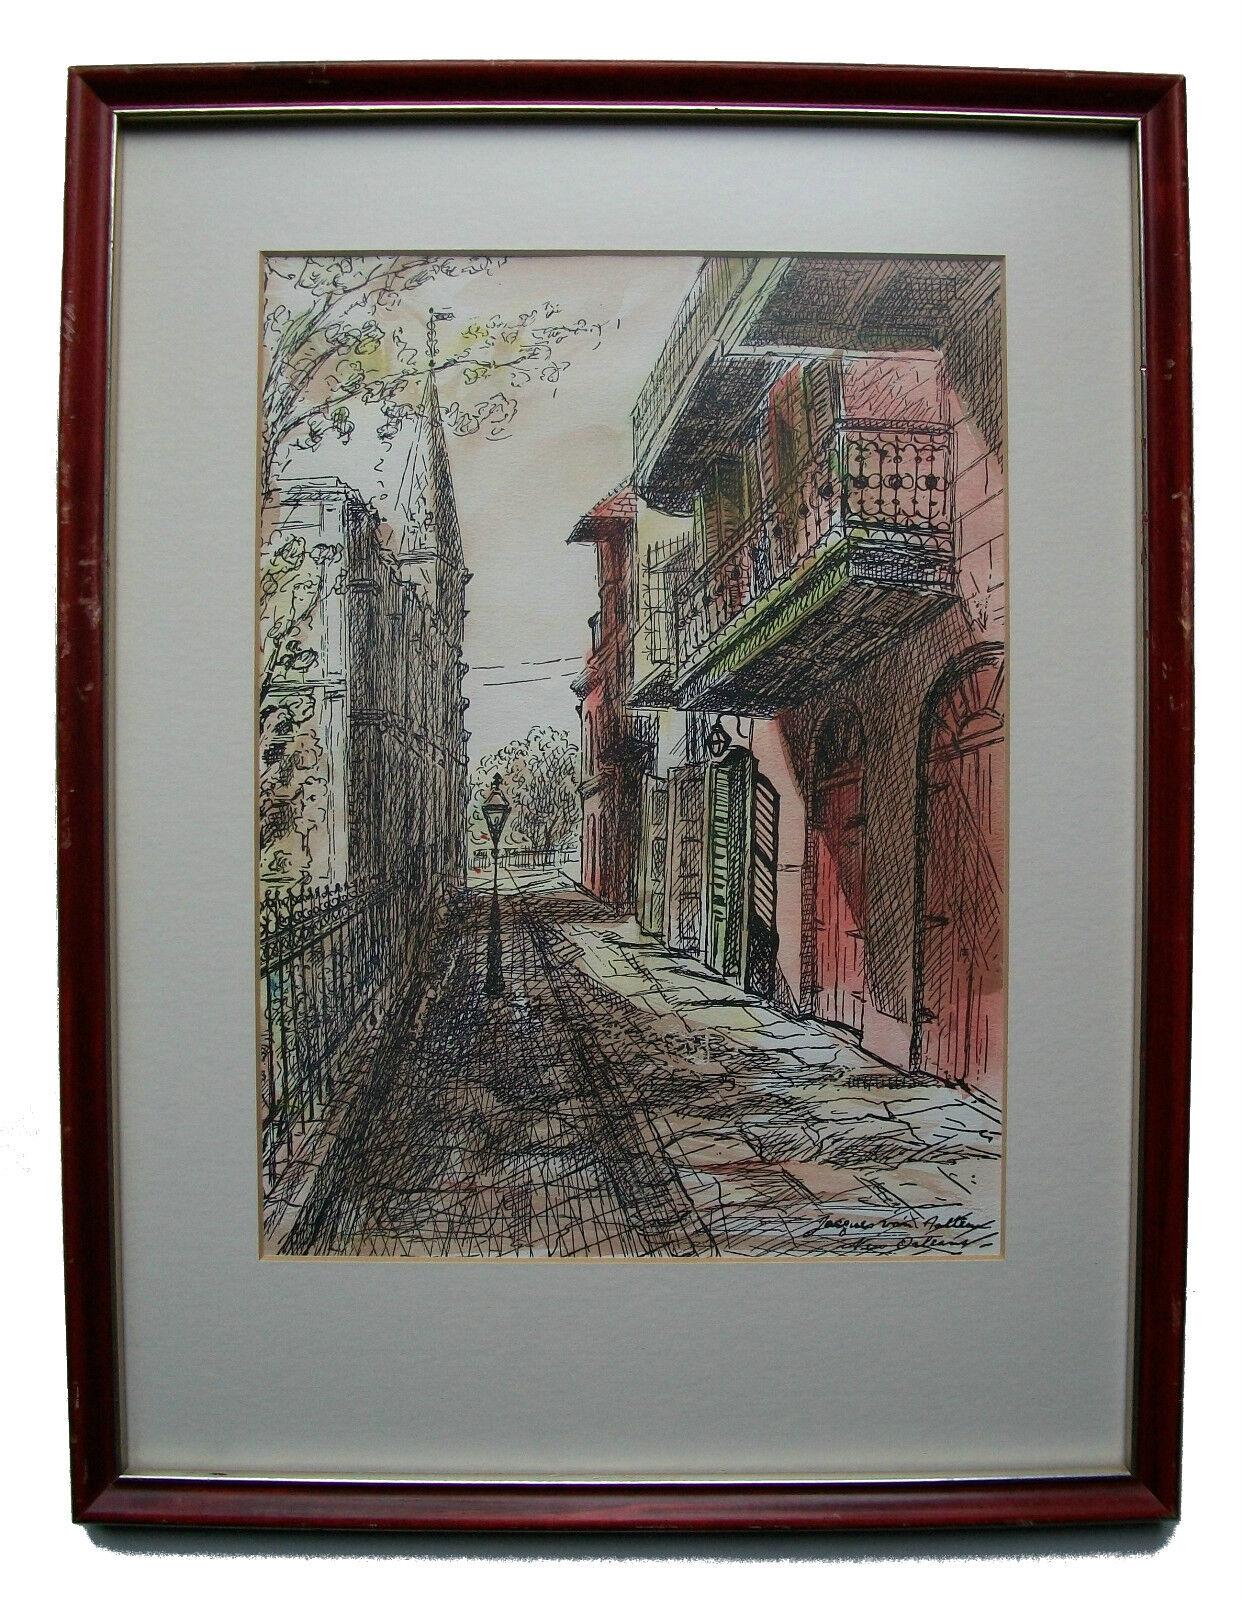 Modern JACQUES VAN AALTEN - New Orleans - Hand Colored Print (1) - Framed - C. 1960's For Sale